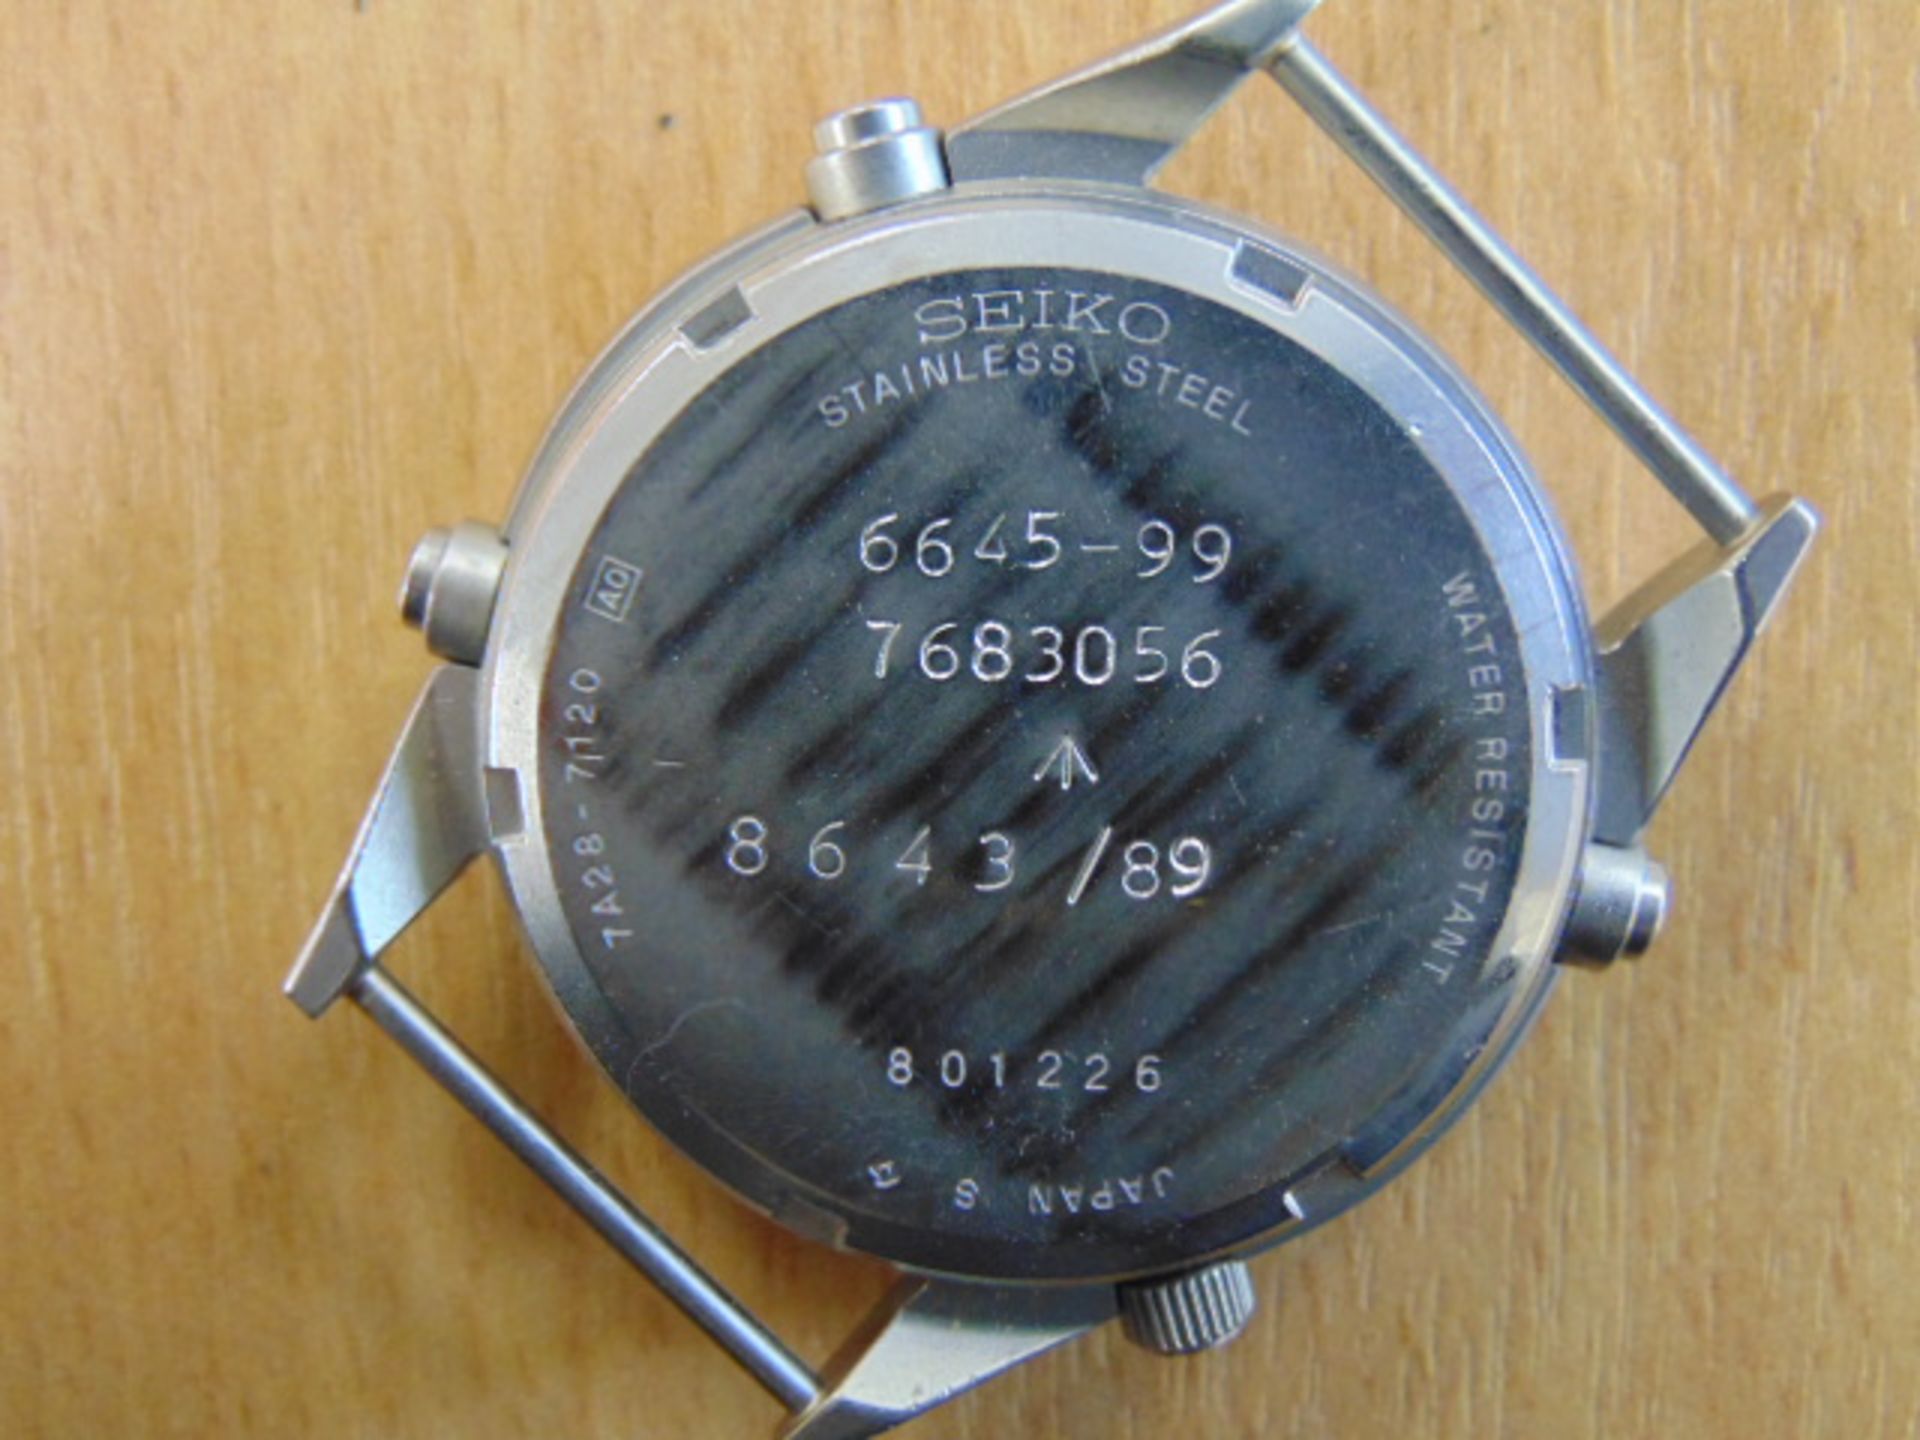 VERY RARE SEIKO GEN1 RAF ISSUE PILOTS CHRONO NATO MARKED DATED 1989 - Image 4 of 8